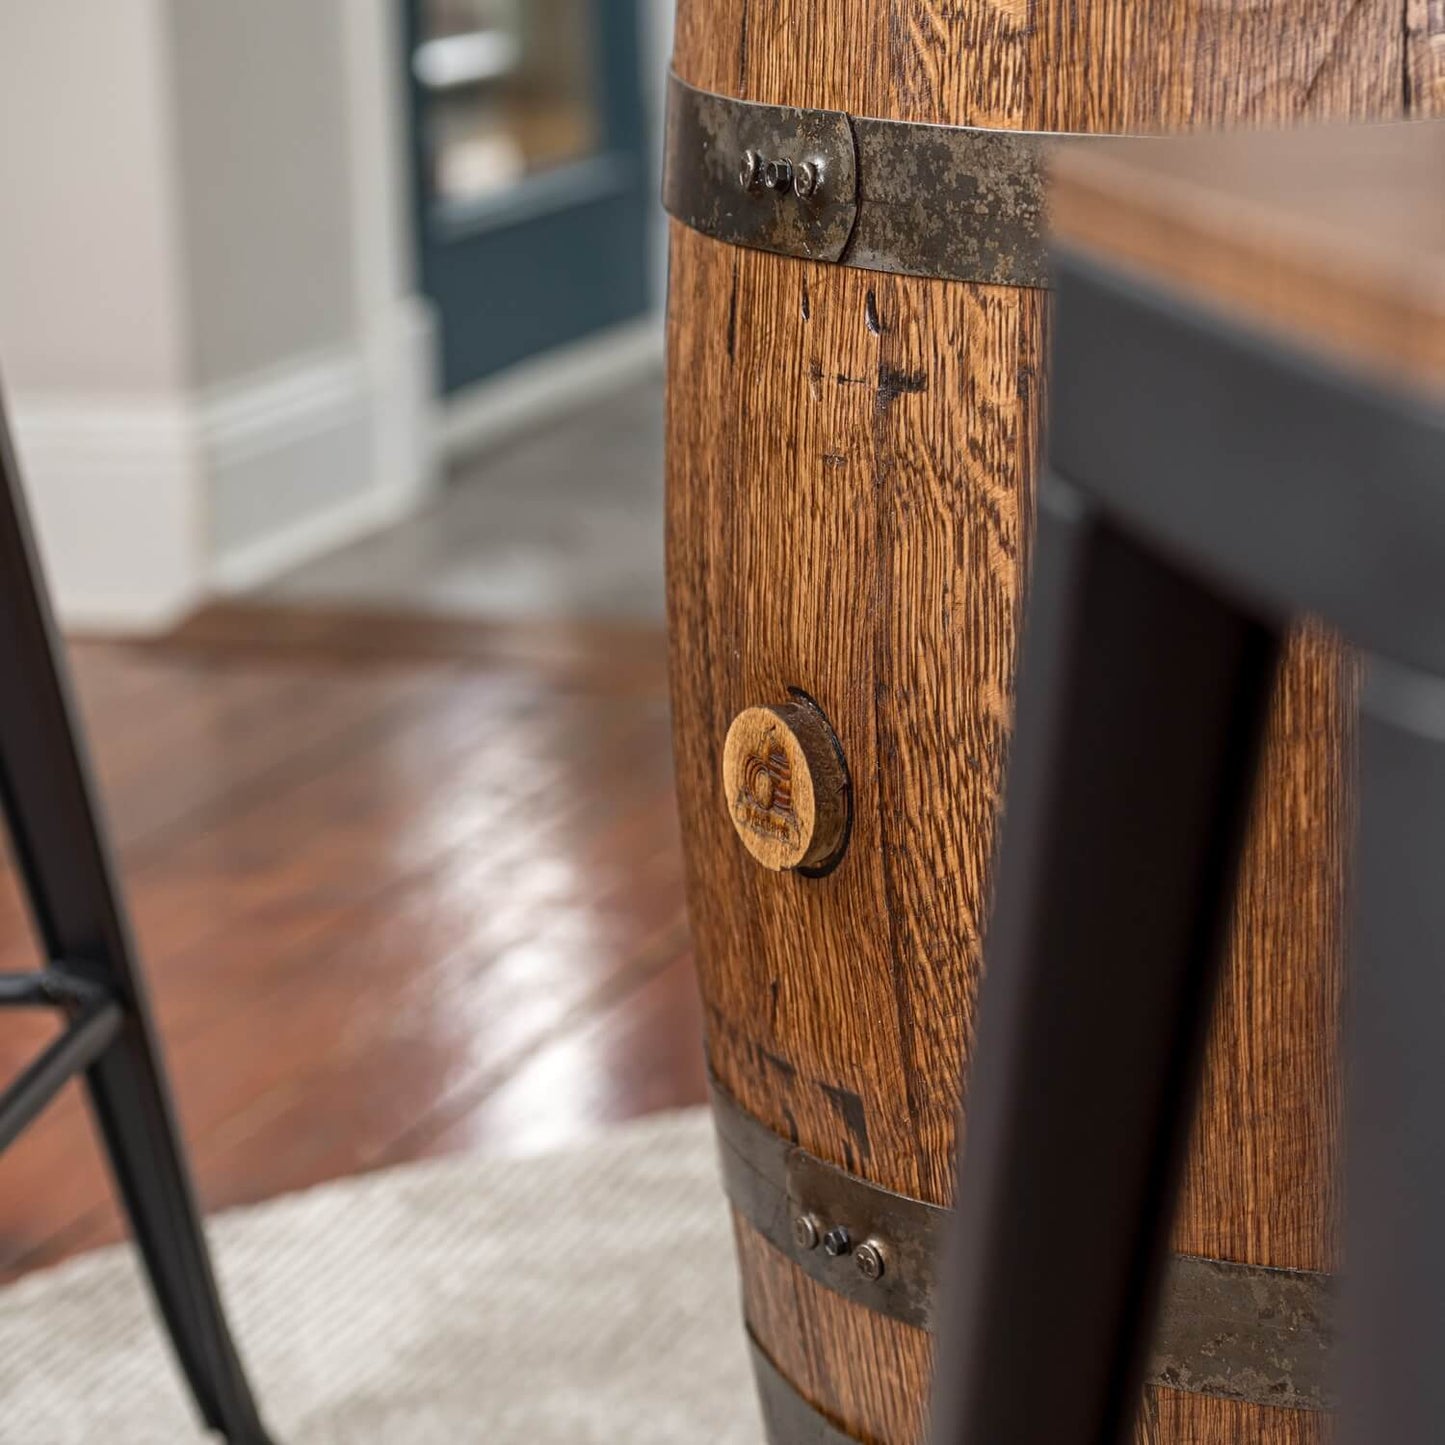 Special Offer: Personalized Whiskey Barrel Pub Table Set w/ 36" Oak Top, 4 Stools, and Free Delivery